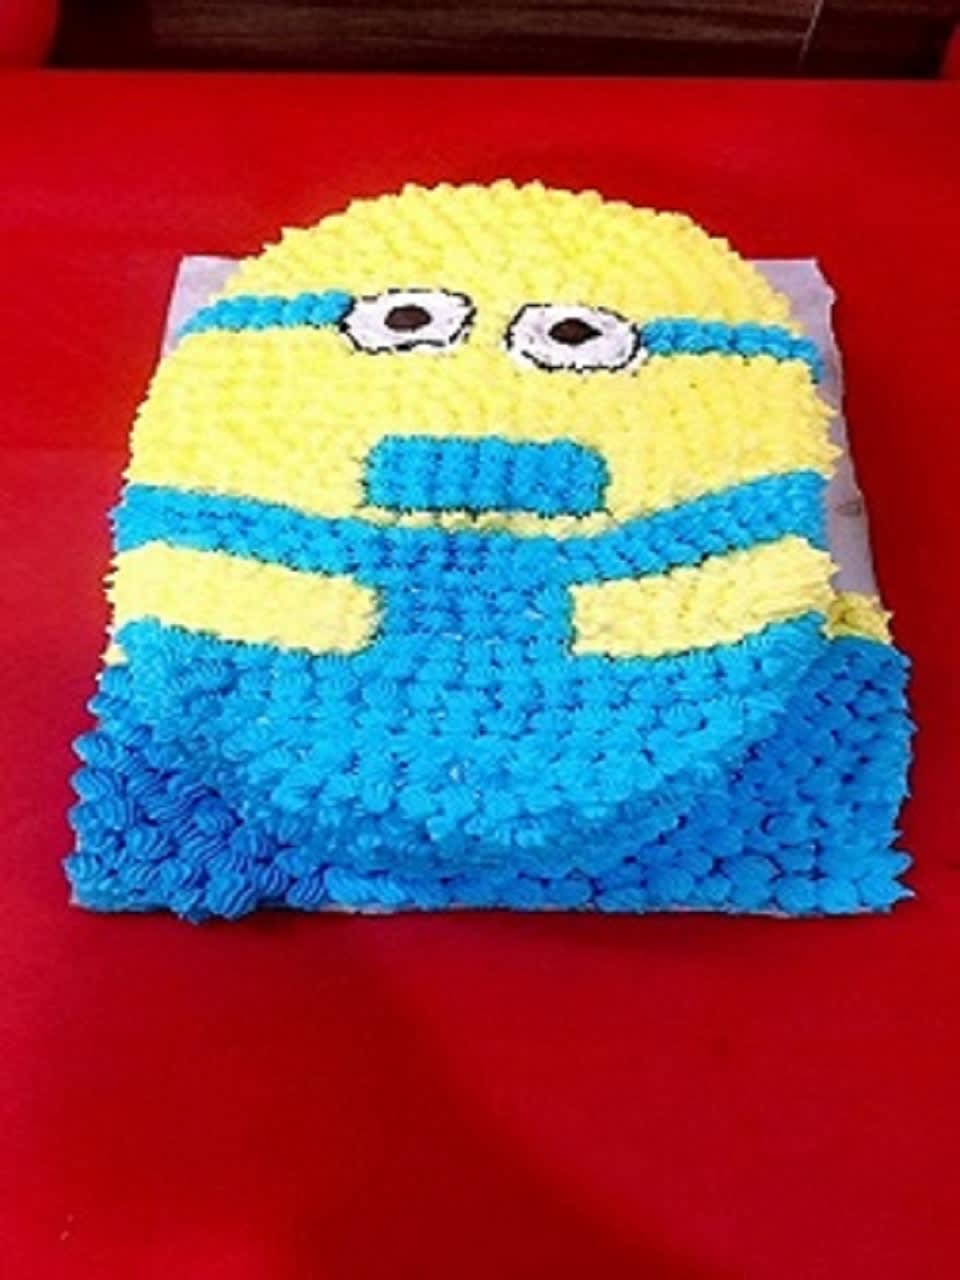 Minion Yellow Birthday Cake - Starting from Just 38 AED